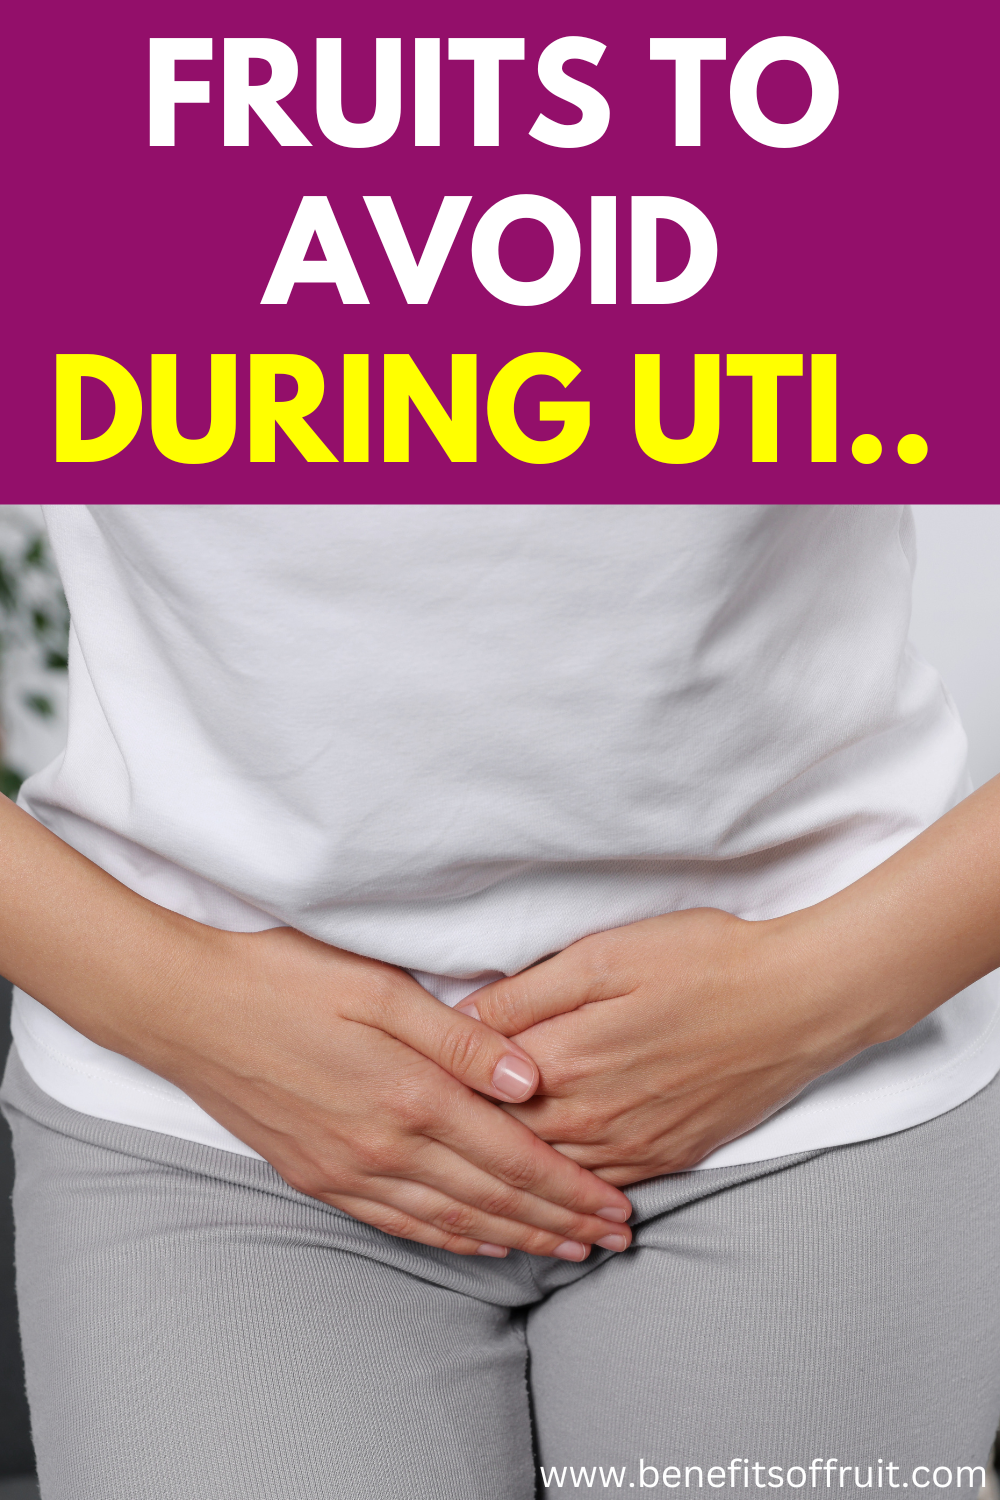 Fruits To Avoid During Uti